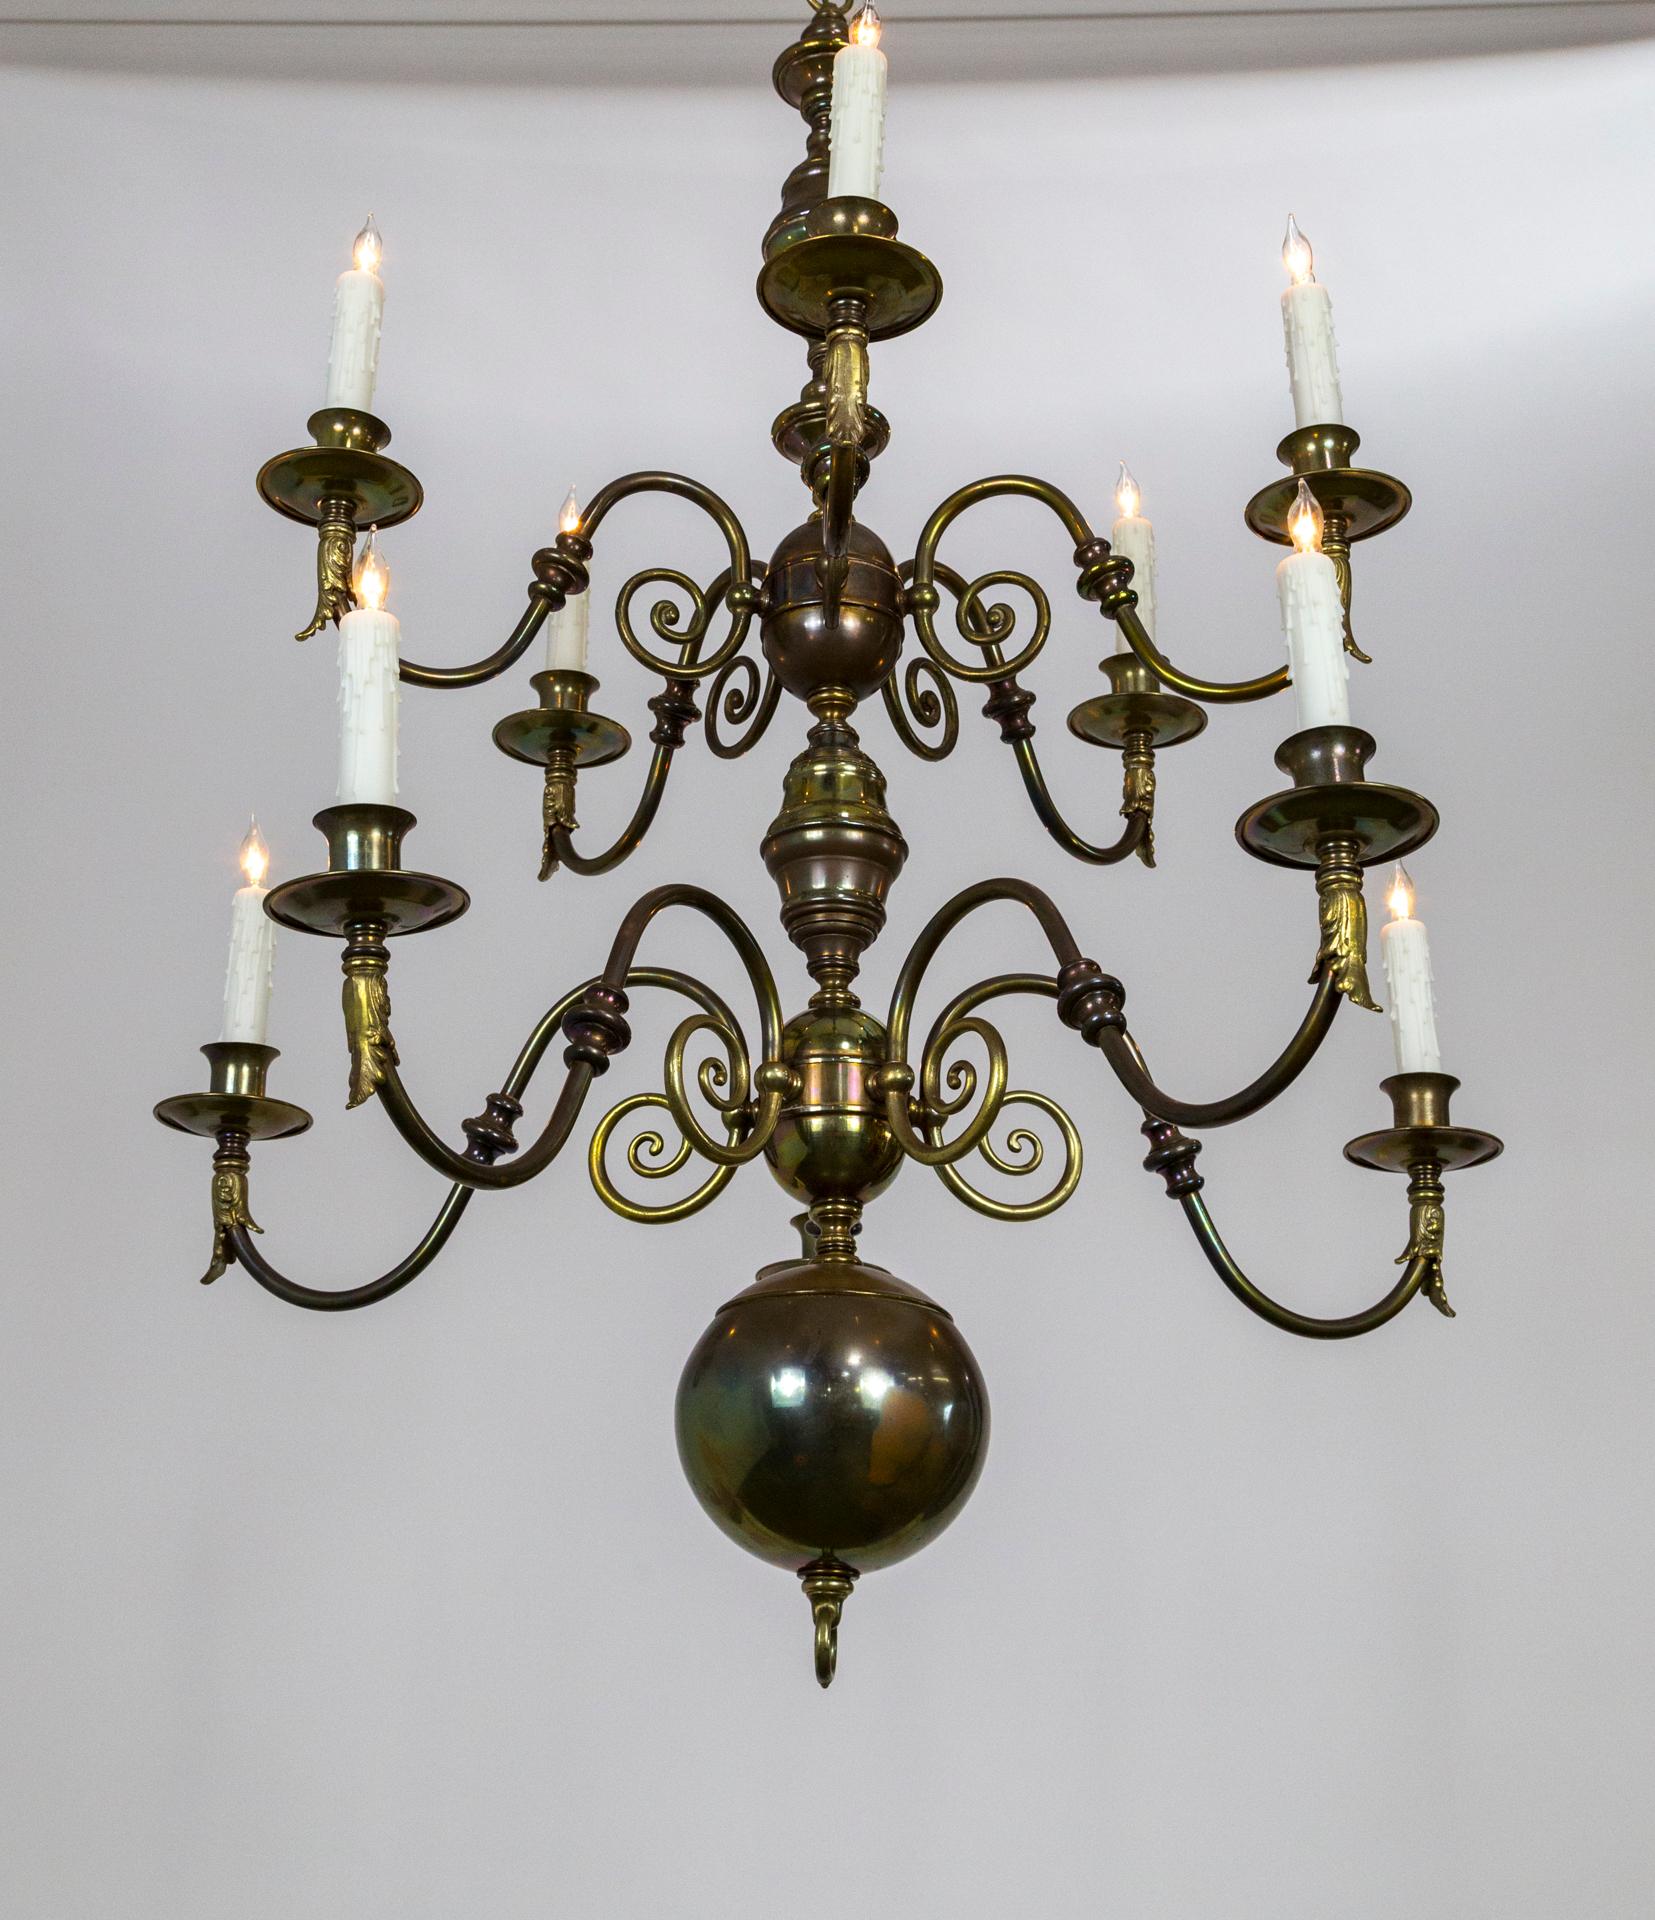 Lengthy Dutch Baroque 2-Tier Brass Scroll Candlestick Chandelier In Good Condition For Sale In San Francisco, CA